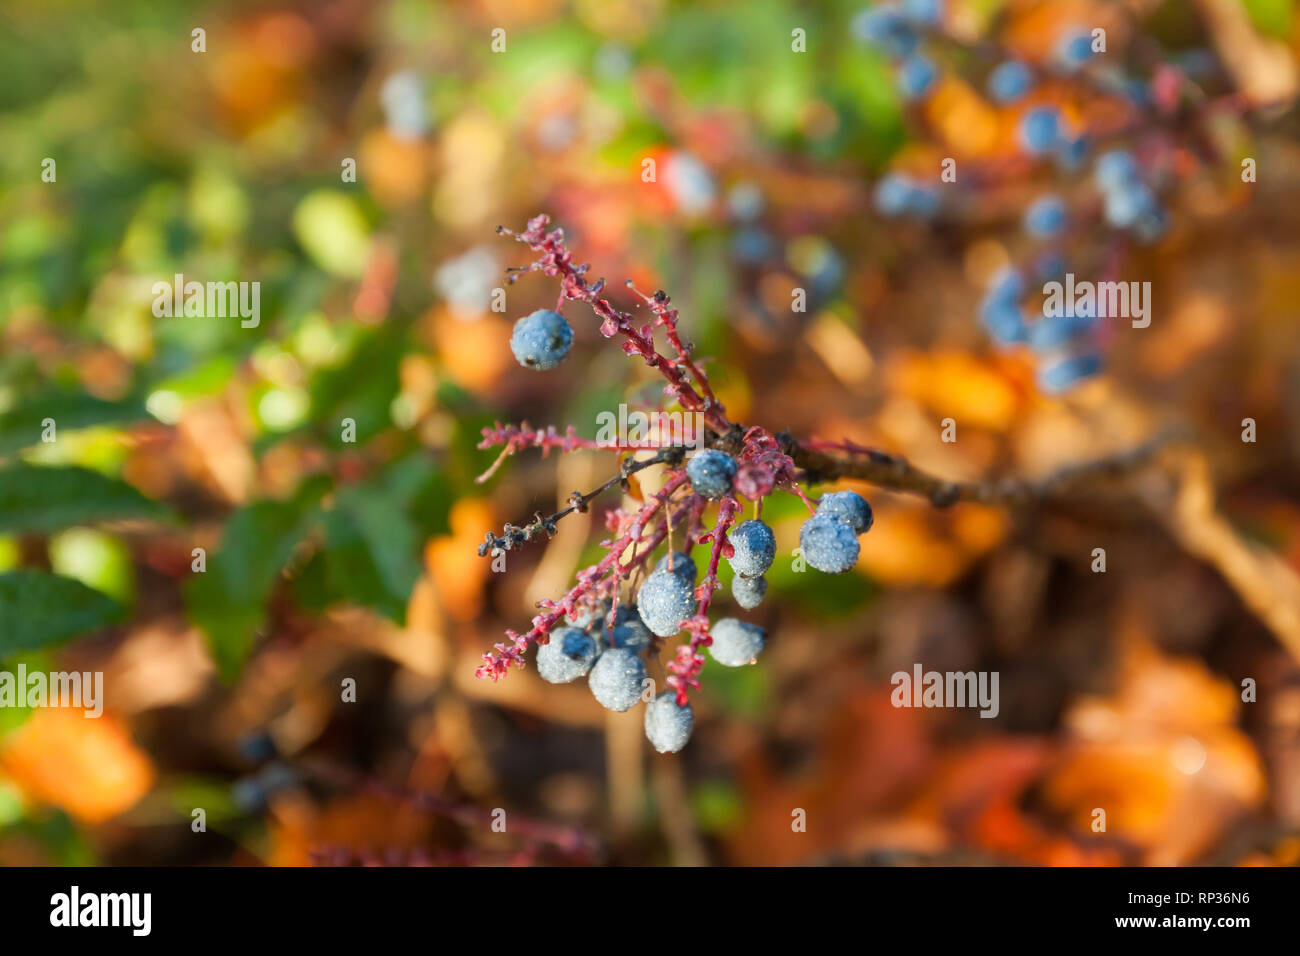 Shrub with blue berries of berberis with dew drops in Finland at autumn. Stock Photo